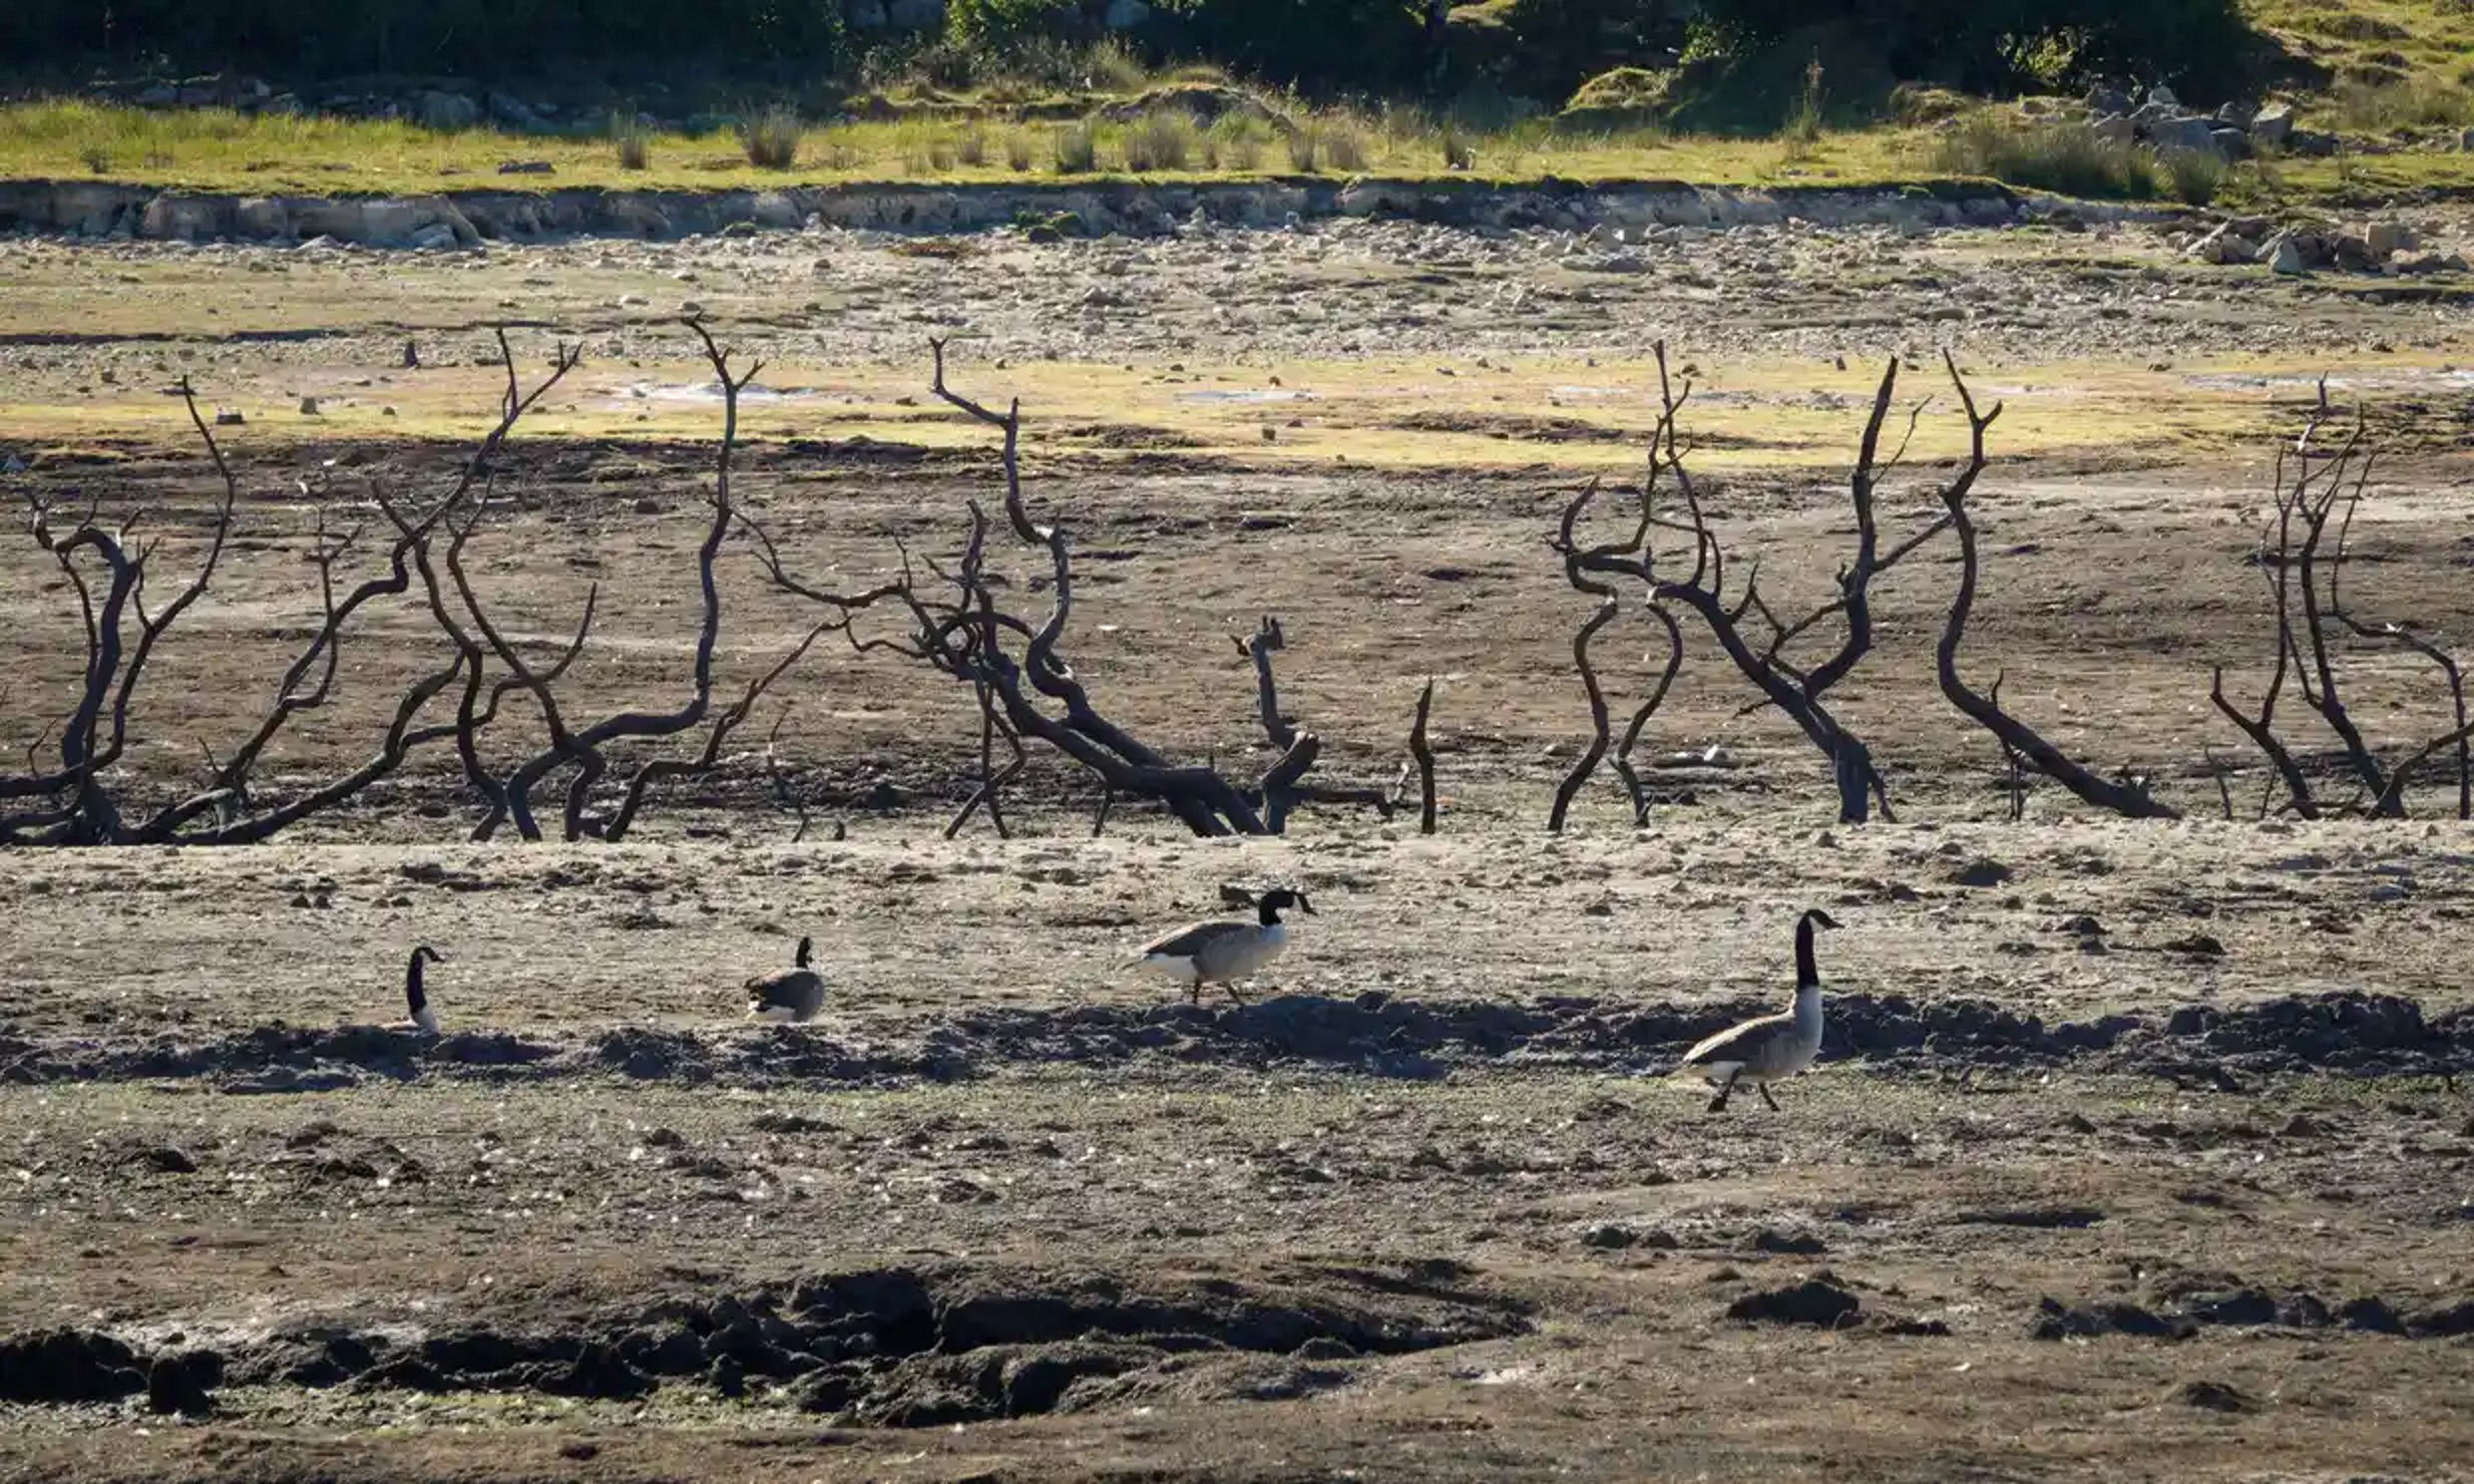 In August 2022, Colliford Lake near Bodmin, Cornwall, England had dried up. Water levels at Cornwall’s largest reservoir on Bodmin Moor were only 40 percent full. Photo: Matt Cardy / Getty Images